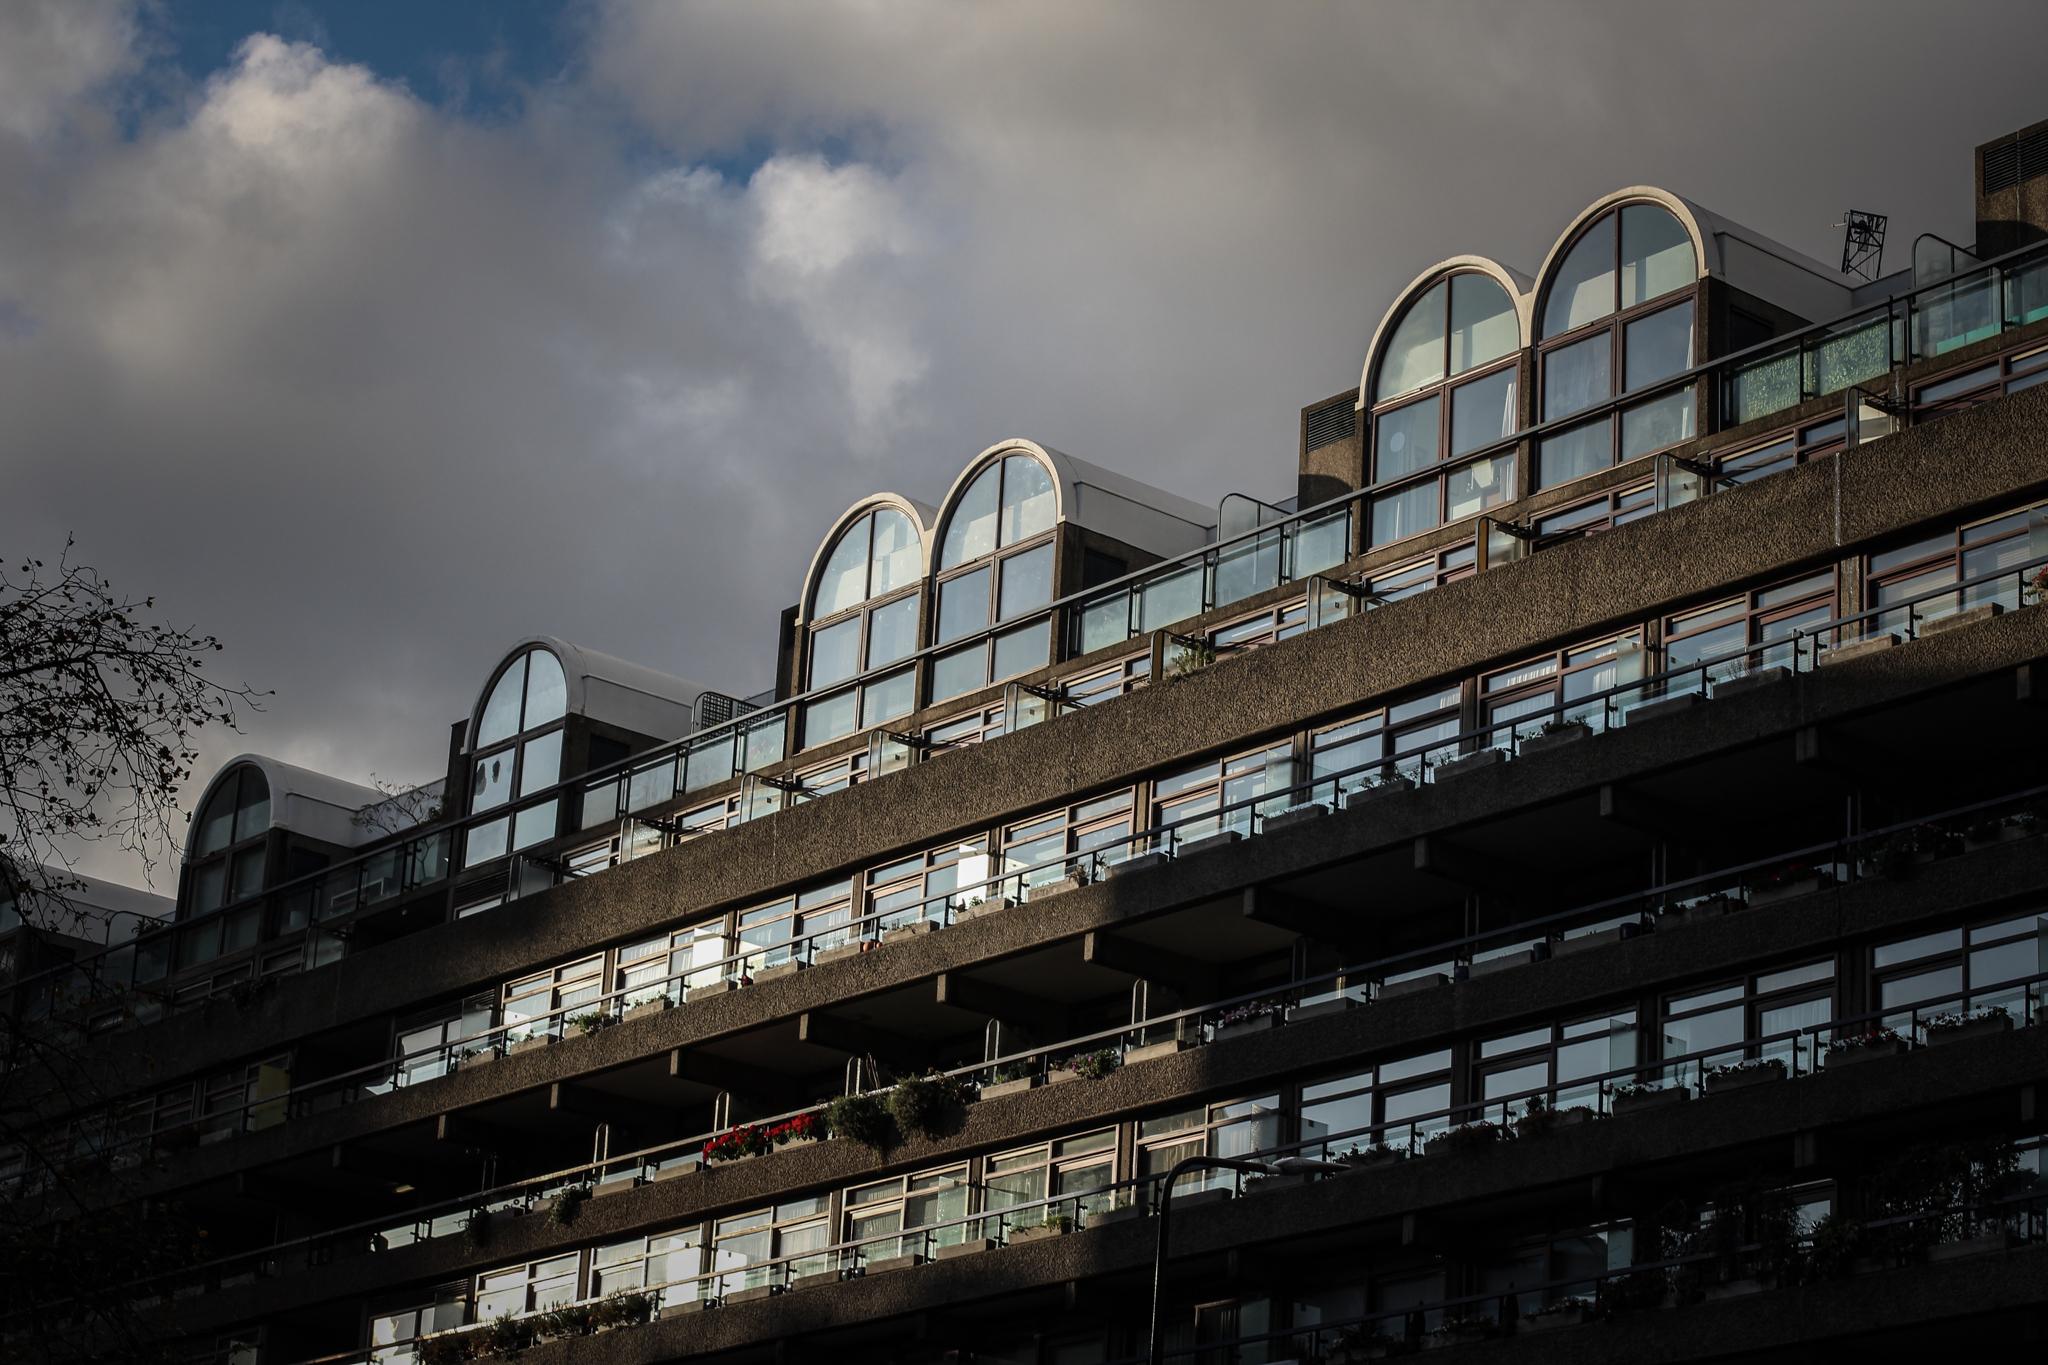 Exterior view of the Barbican, its iconic windows typical of the design of its architects. An autumnal sun, characteristic in London in this season, entering through the windows.